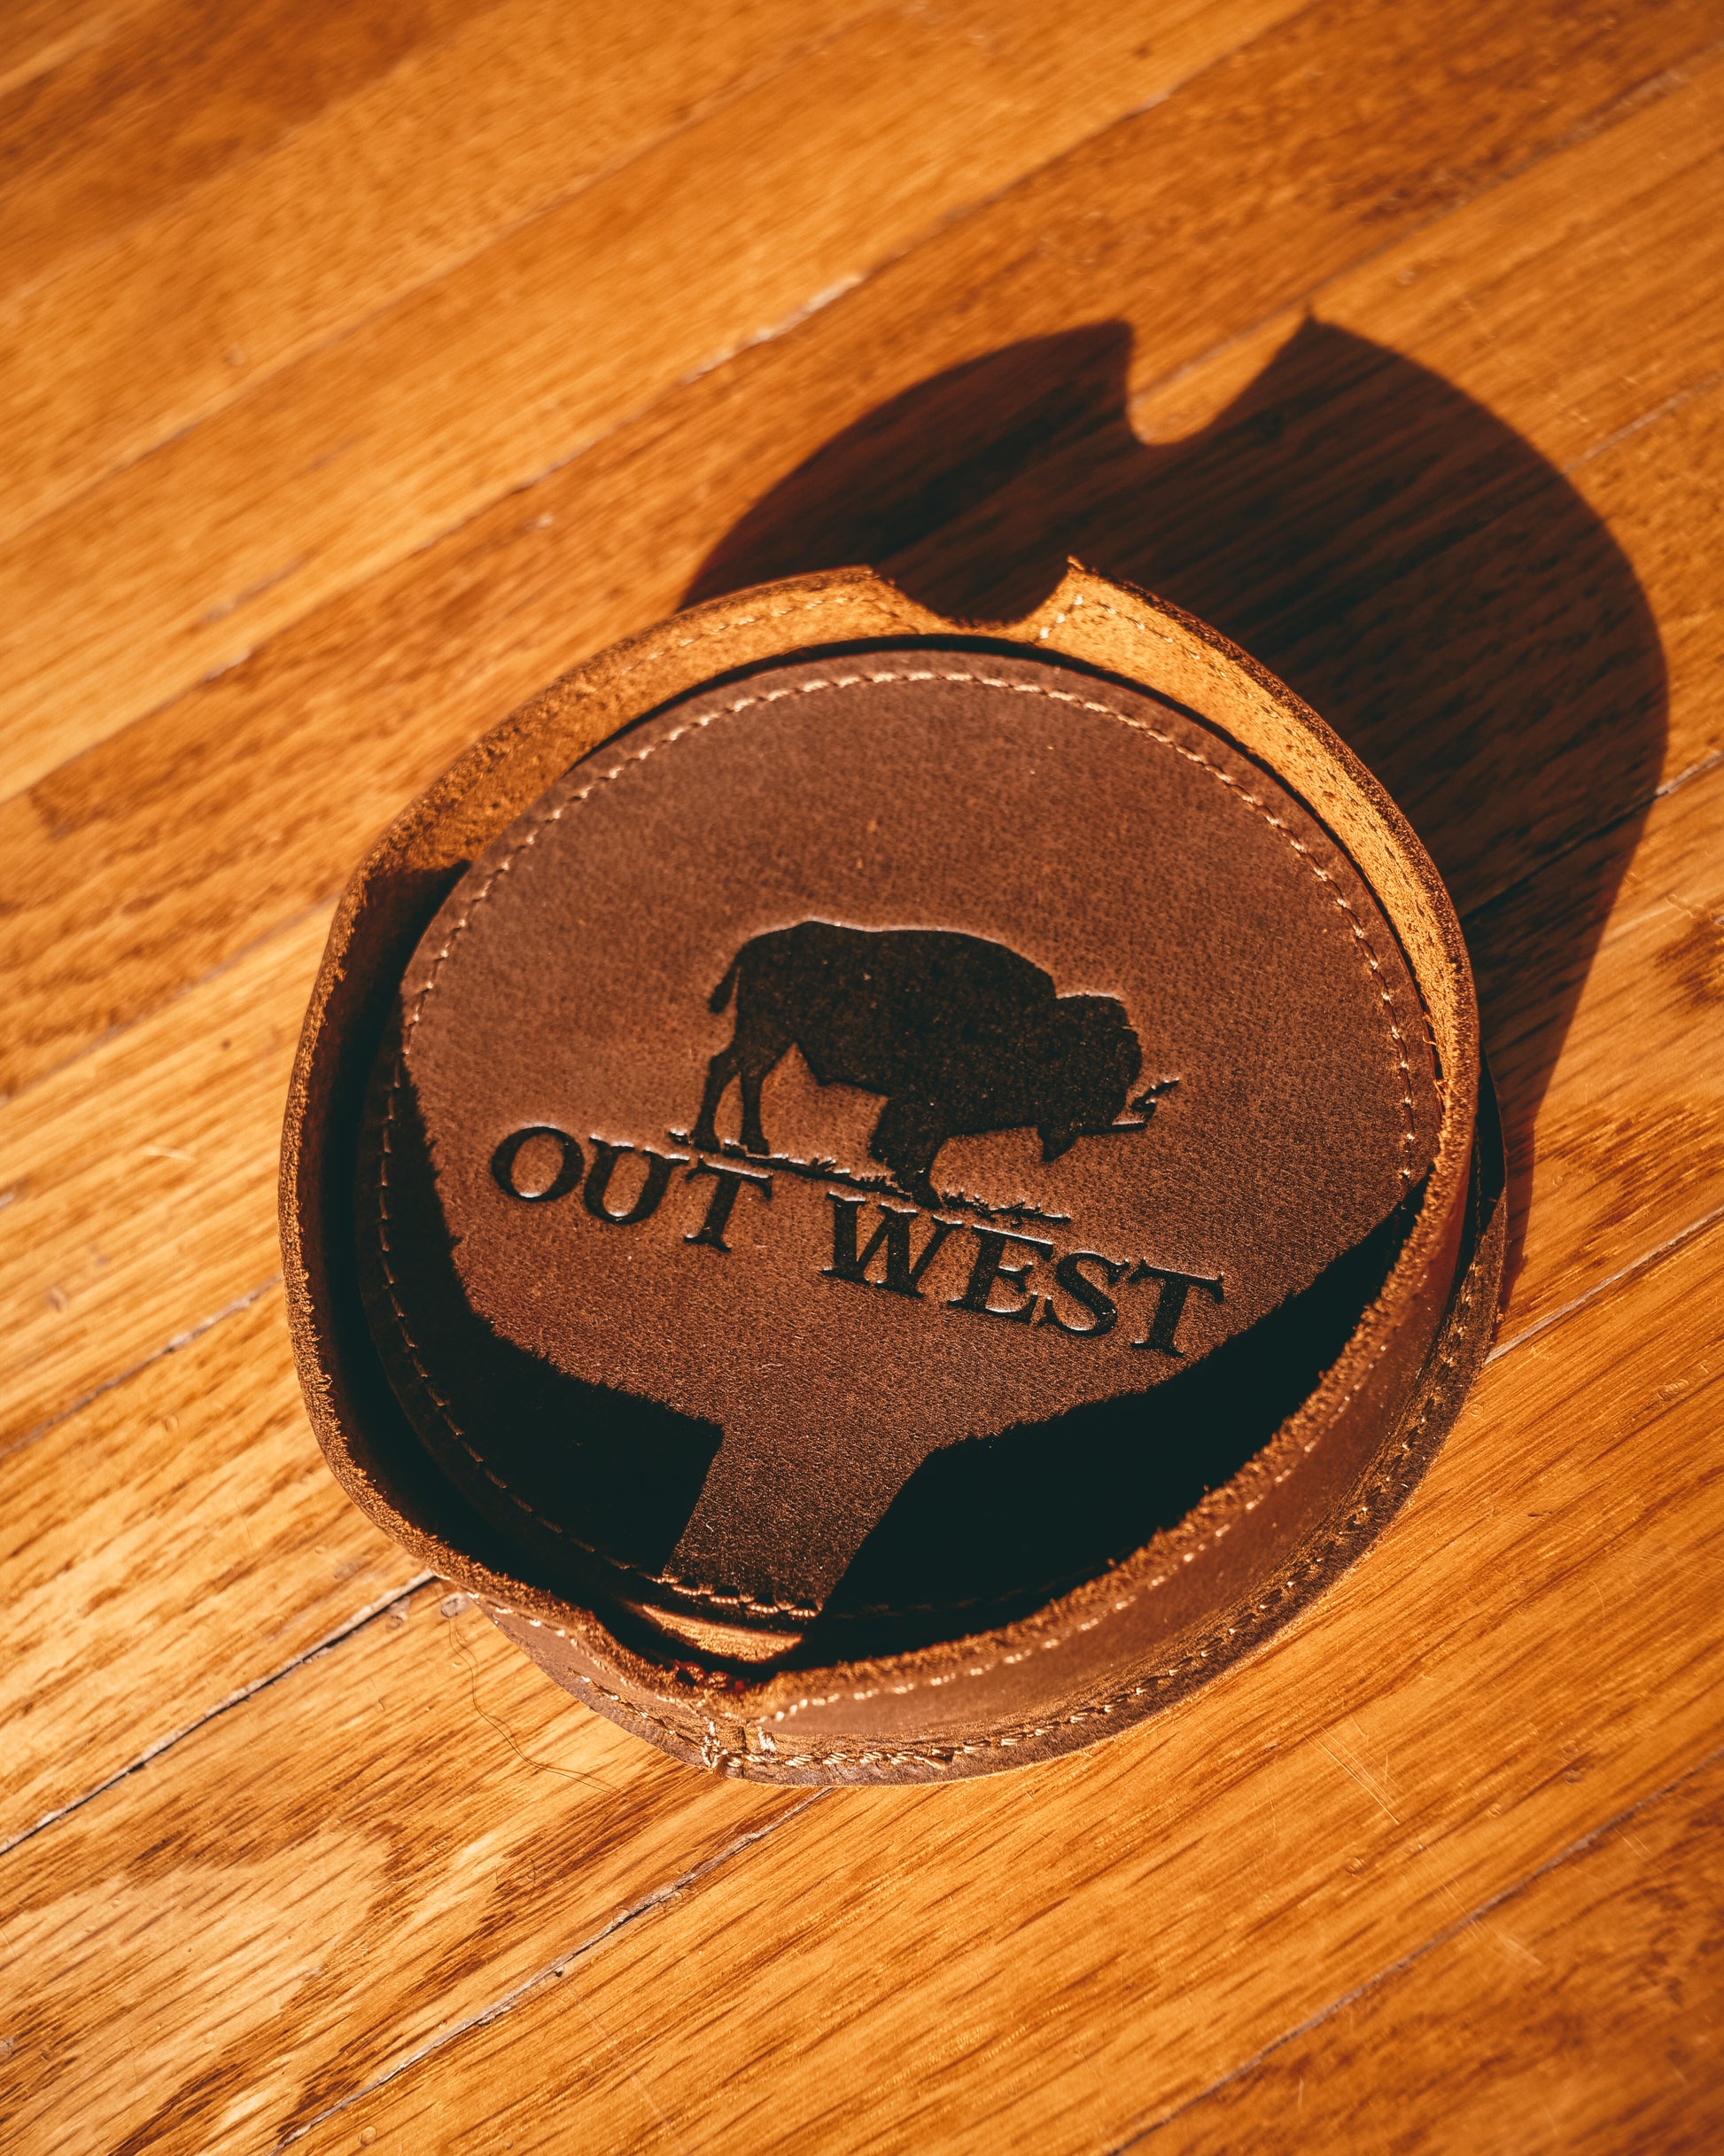 Genuine leather Out West coasters-  Custom designed by Out West and made with genuine leather! Each coaster is branded with the Out West bison logo. Coasters are in a set of 6 + a holder. These coasters will add a true western feel to any home or bar!  Color: Brown  Coaster dimensions: 10cm x 10cm